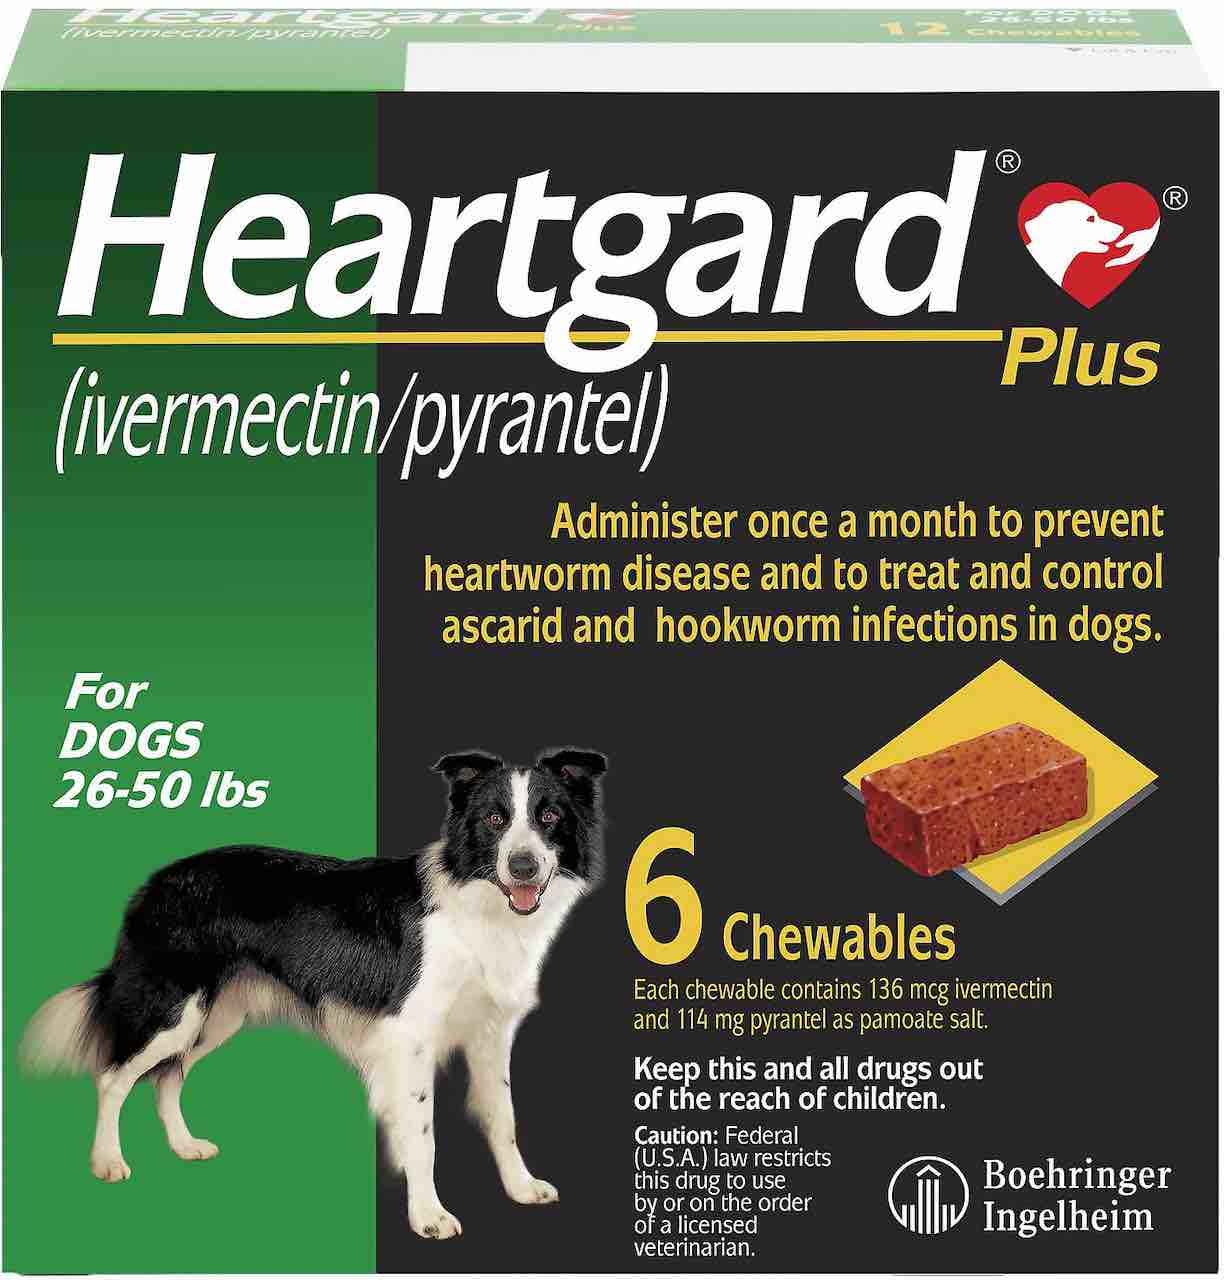 Heartgard Plus Chewables 6 doses for dogs 26-50 lbs (Green) 1